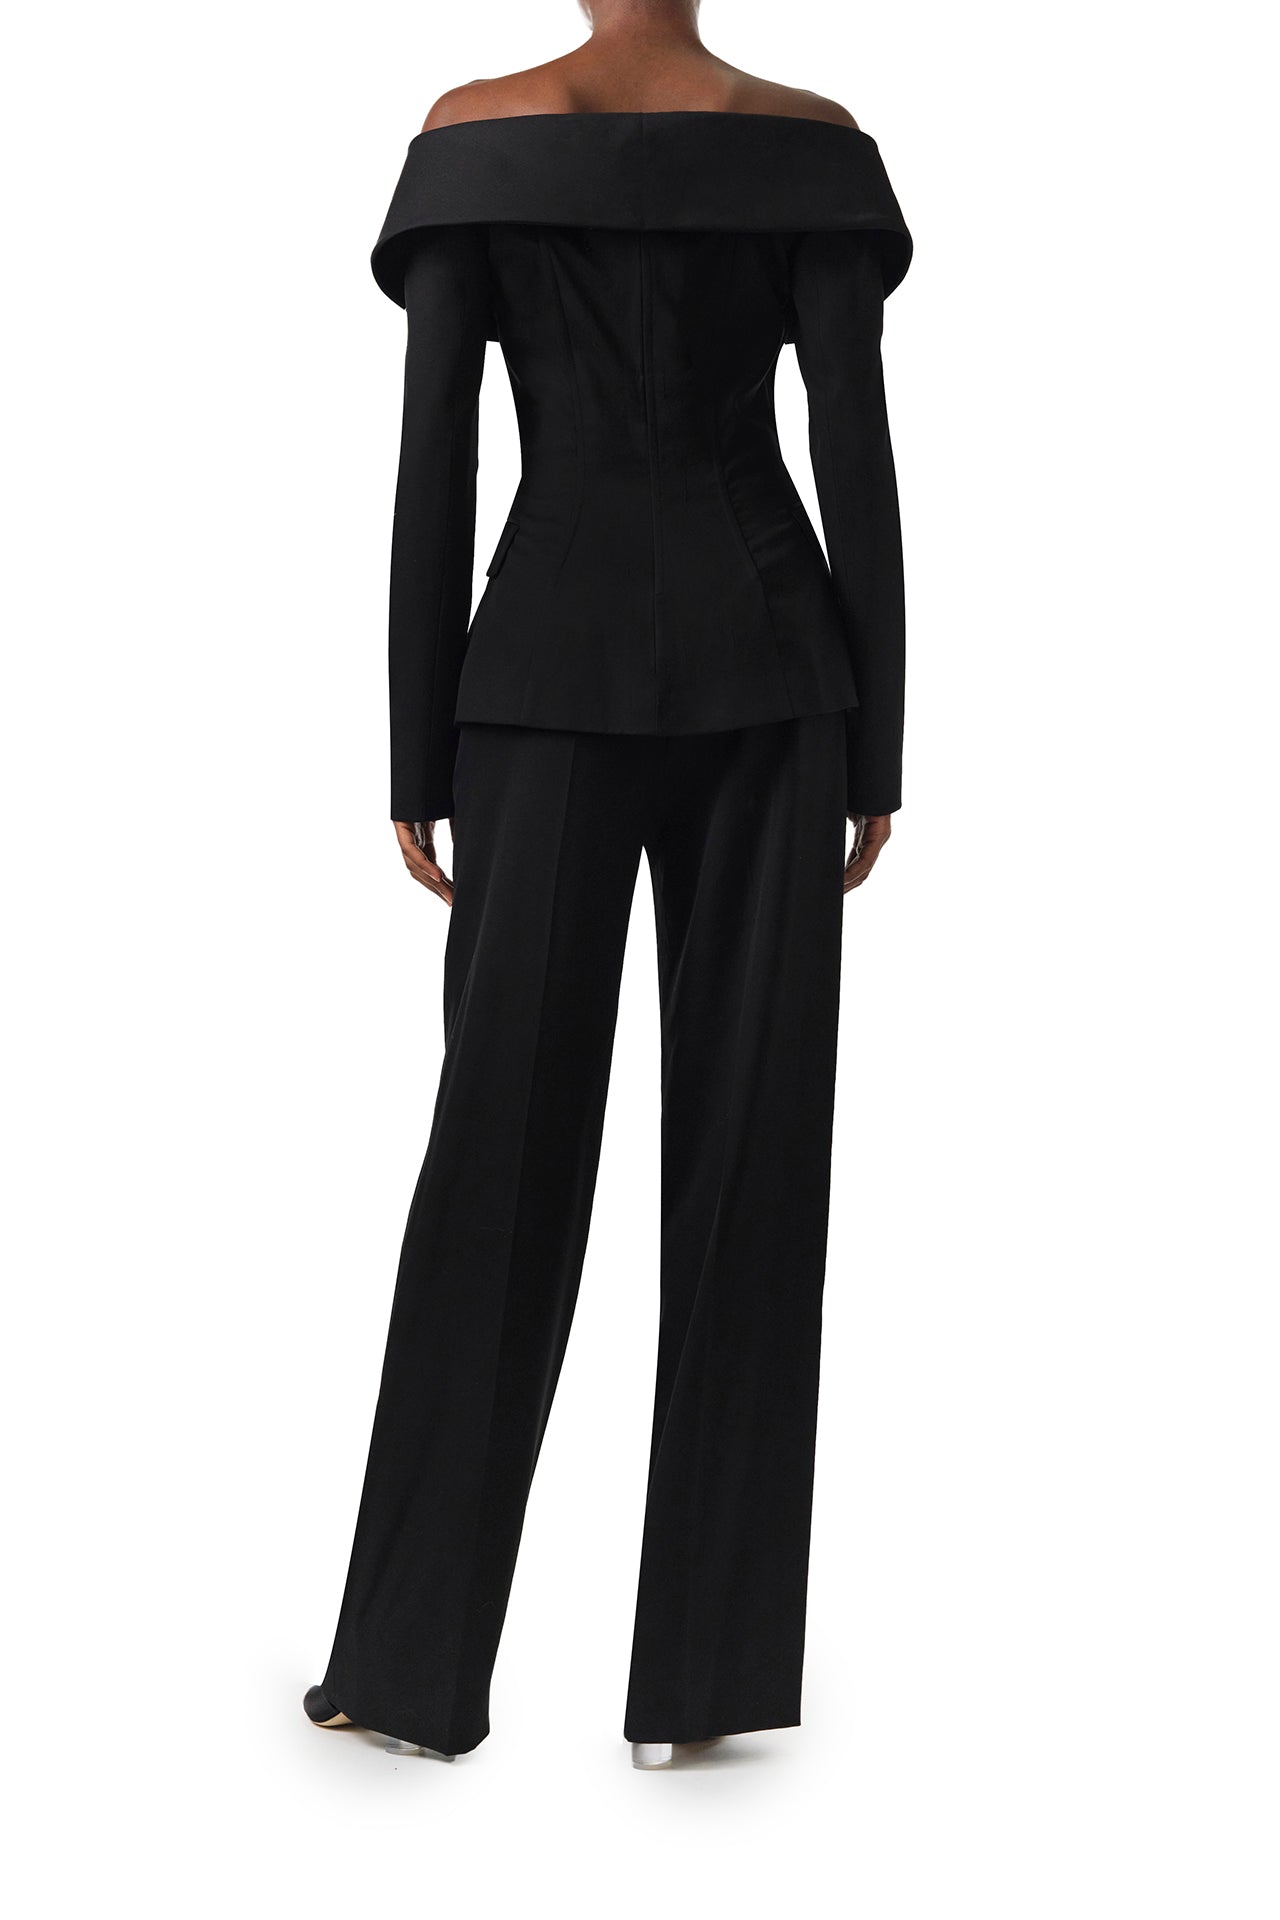 Monique Lhuillier Fall 2024 long sleeve corseted jacket with off-the-shoulder neckline in black wool - back.